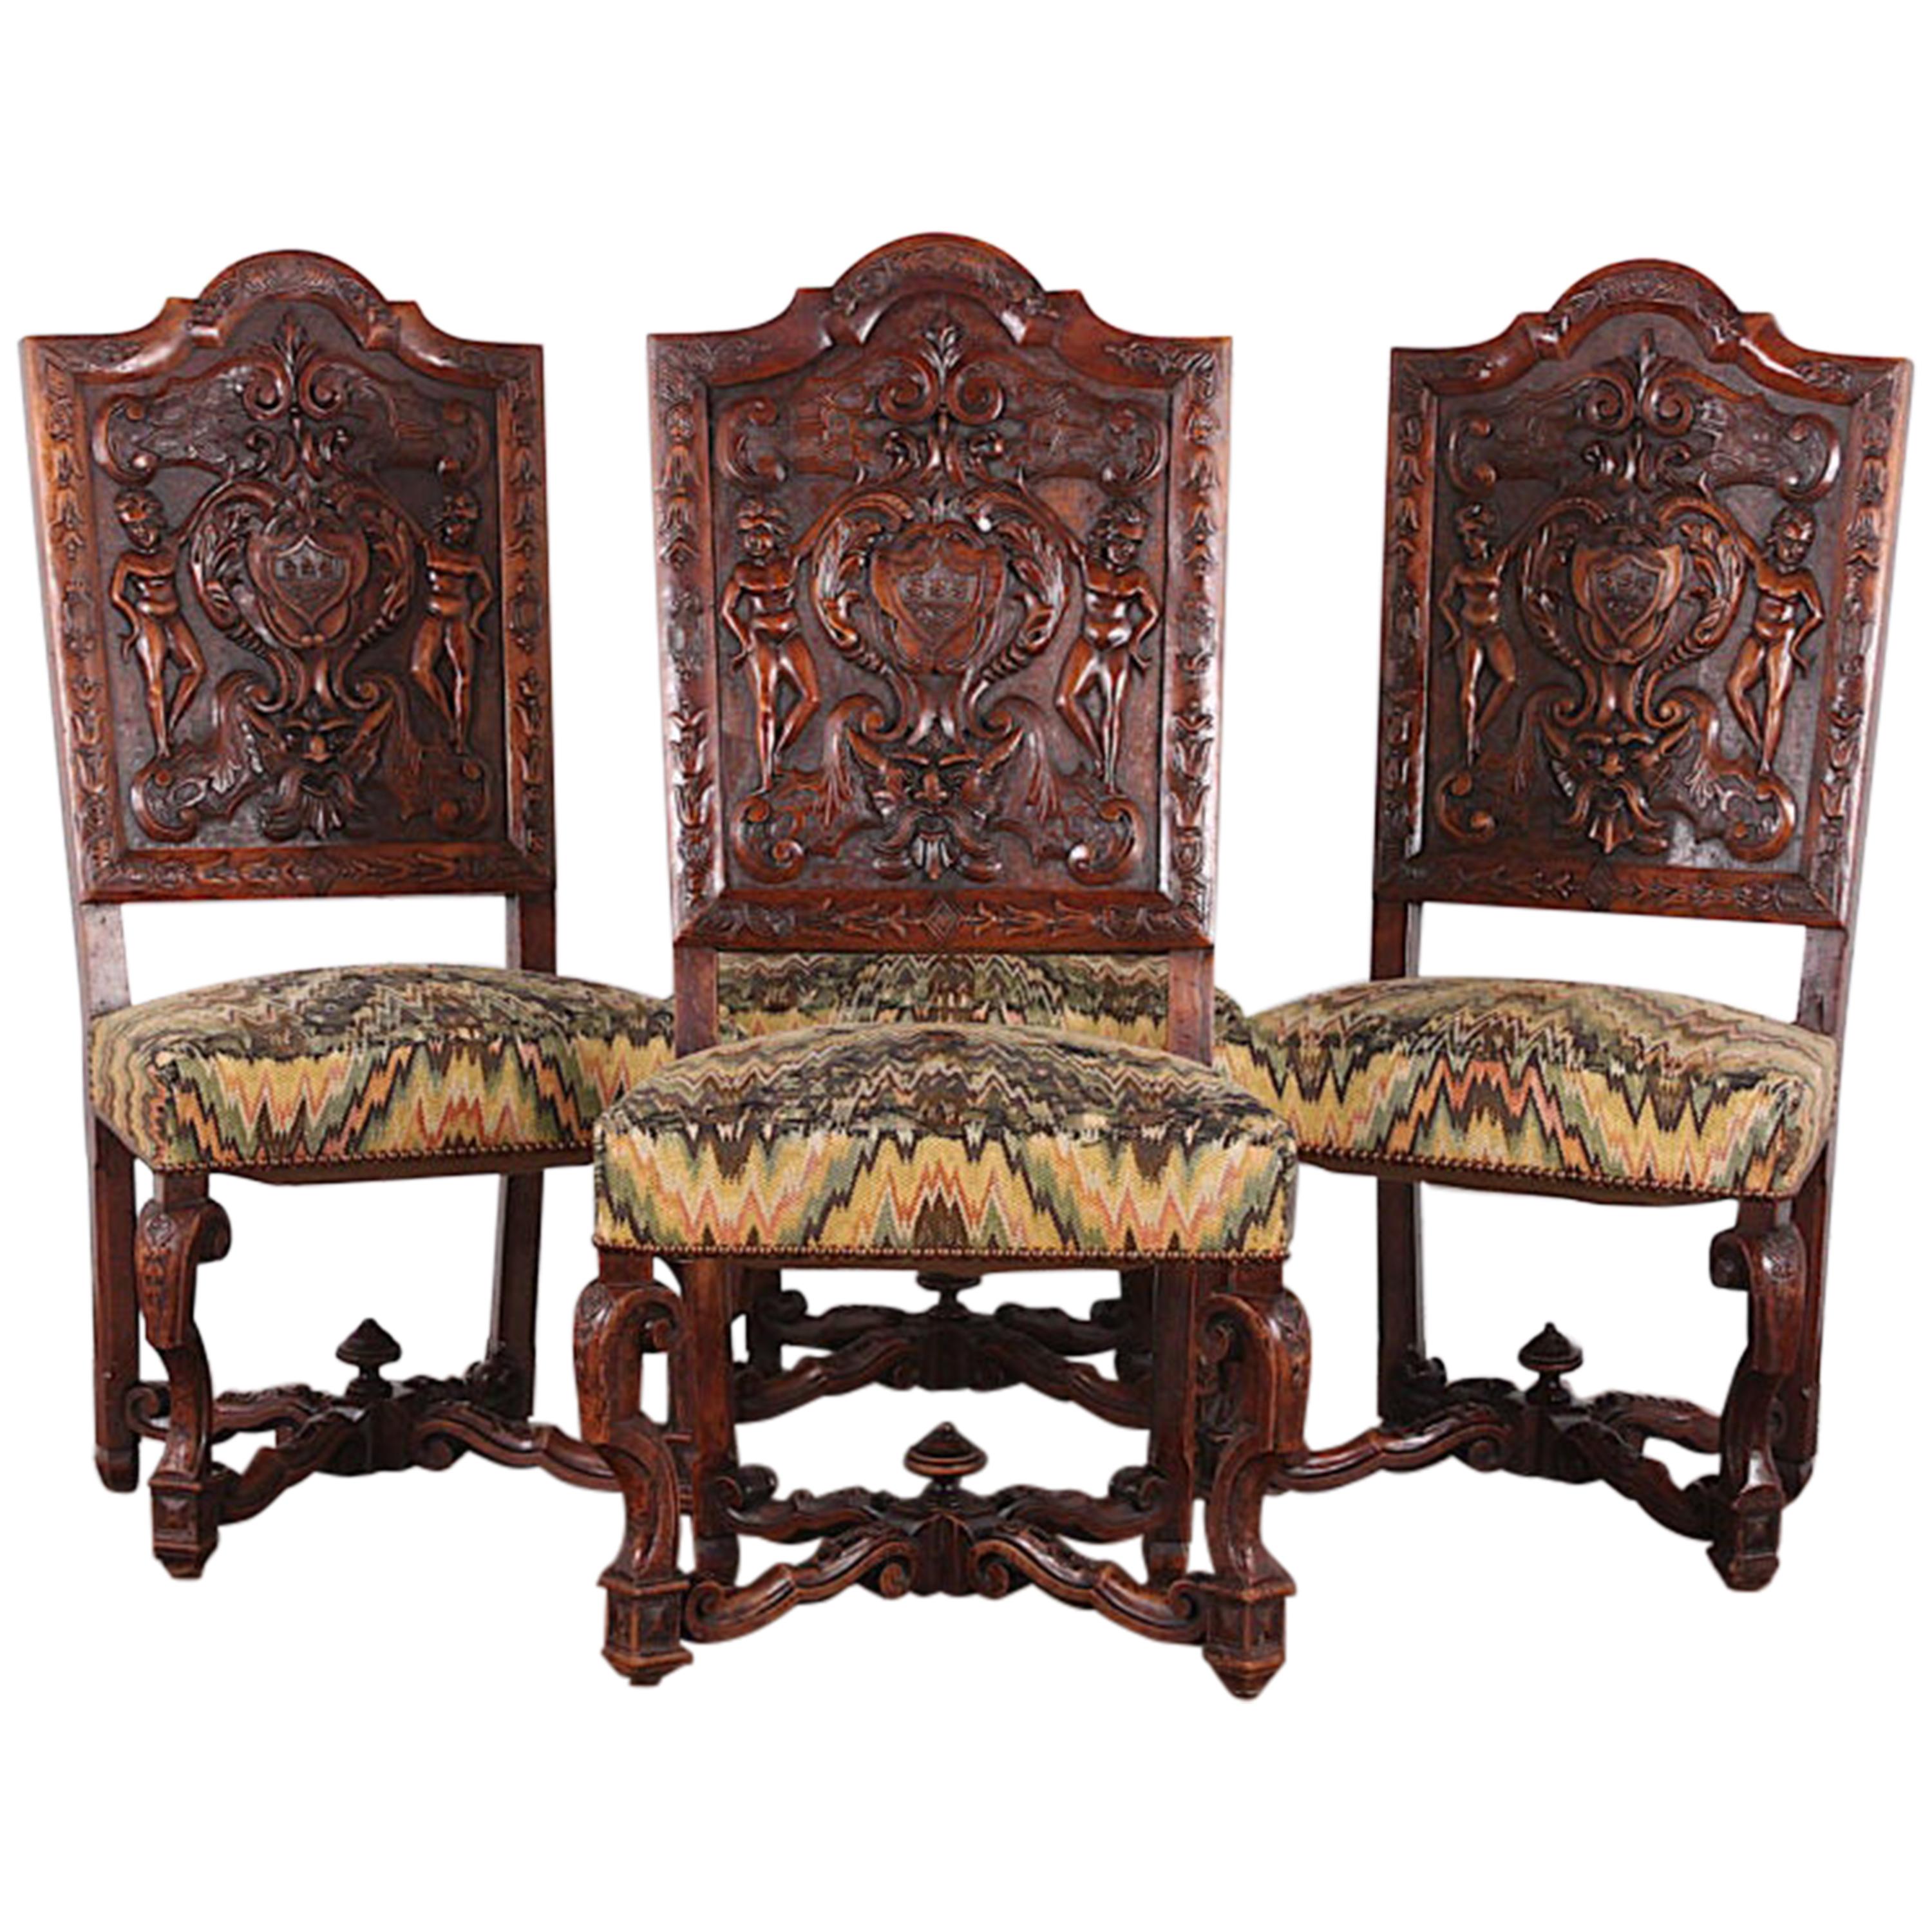 Set of Four 19th Century Carved Walnut Italian Chairs